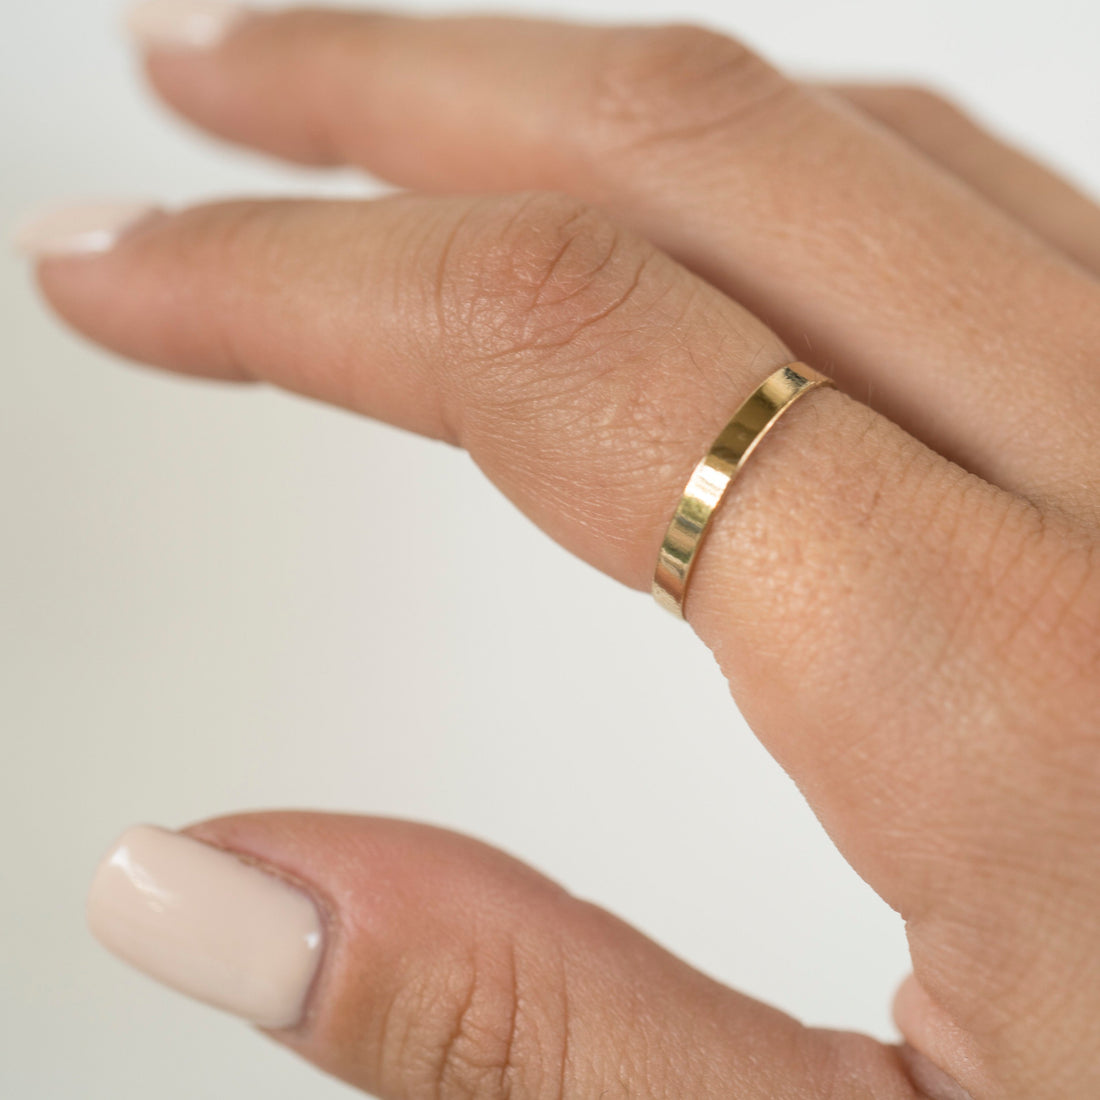 3mm Gold Flat Ring, 14k Gold Filled Ring, Gold Stacker, Gold Band Ring, Delicate Ring, Simple Gold Ring, Womens Gold Ring, Dainty Gold Ring